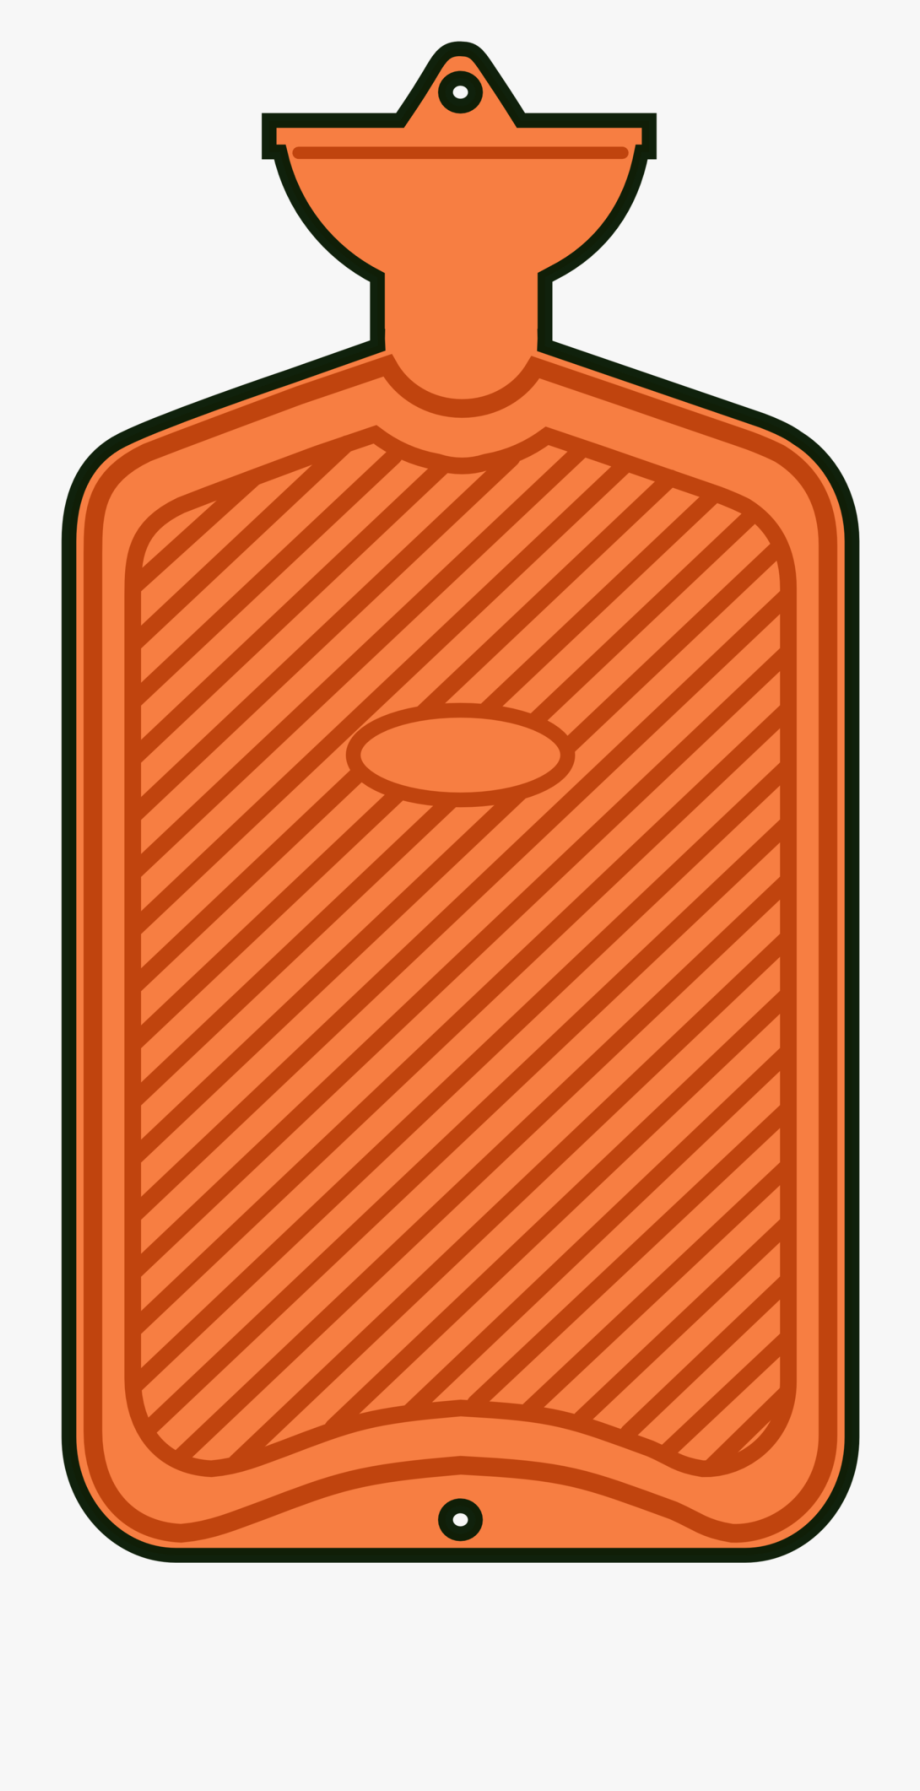 This Free Clip Arts Design Of Hot Water Bottle